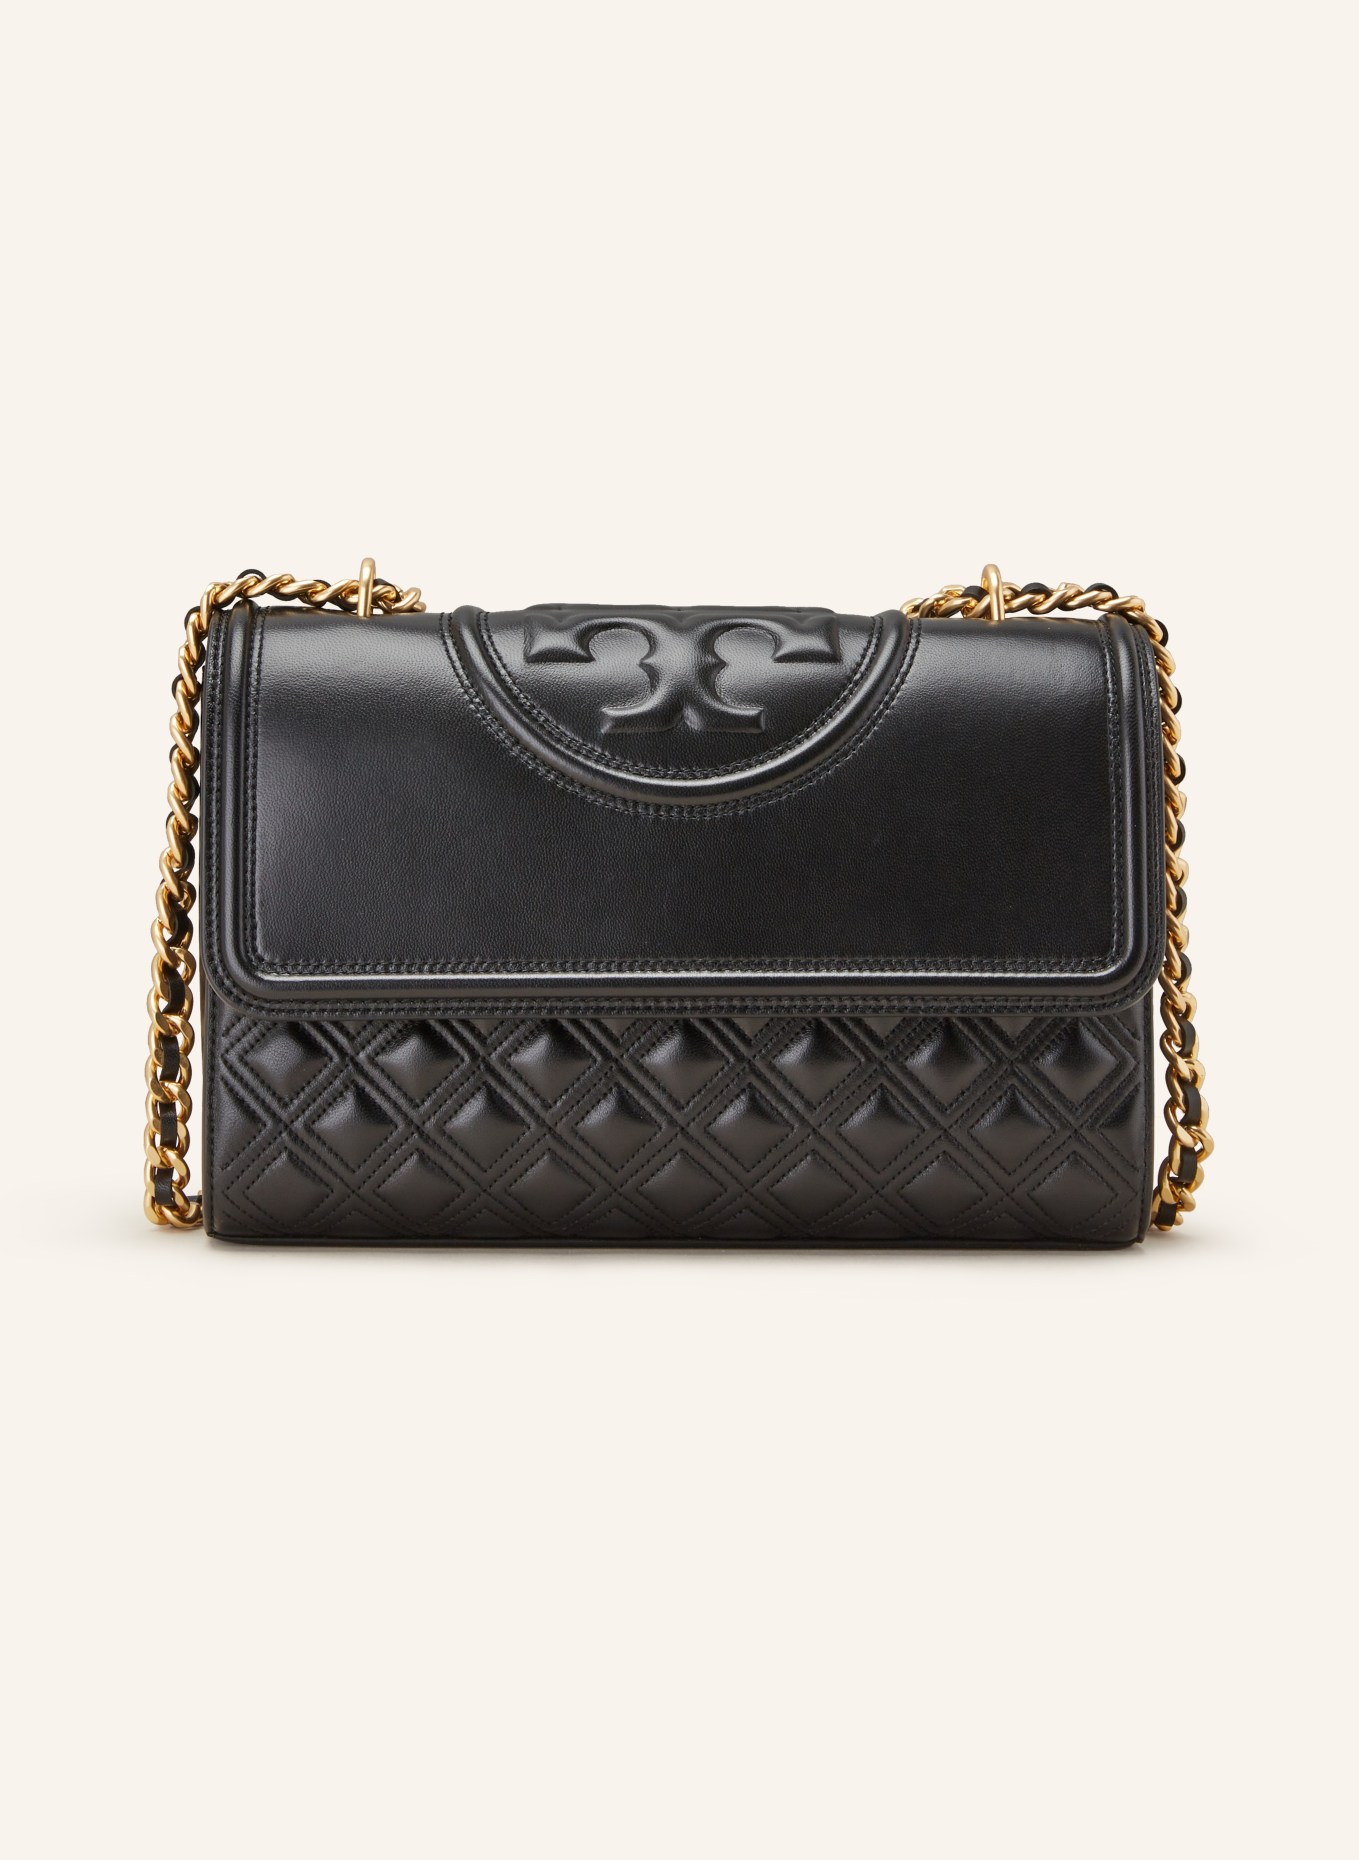 Tory Burch Lee Radziwill Double Bag Review - Why We Love The Tory Burch Lee  Radziwill Double Bag